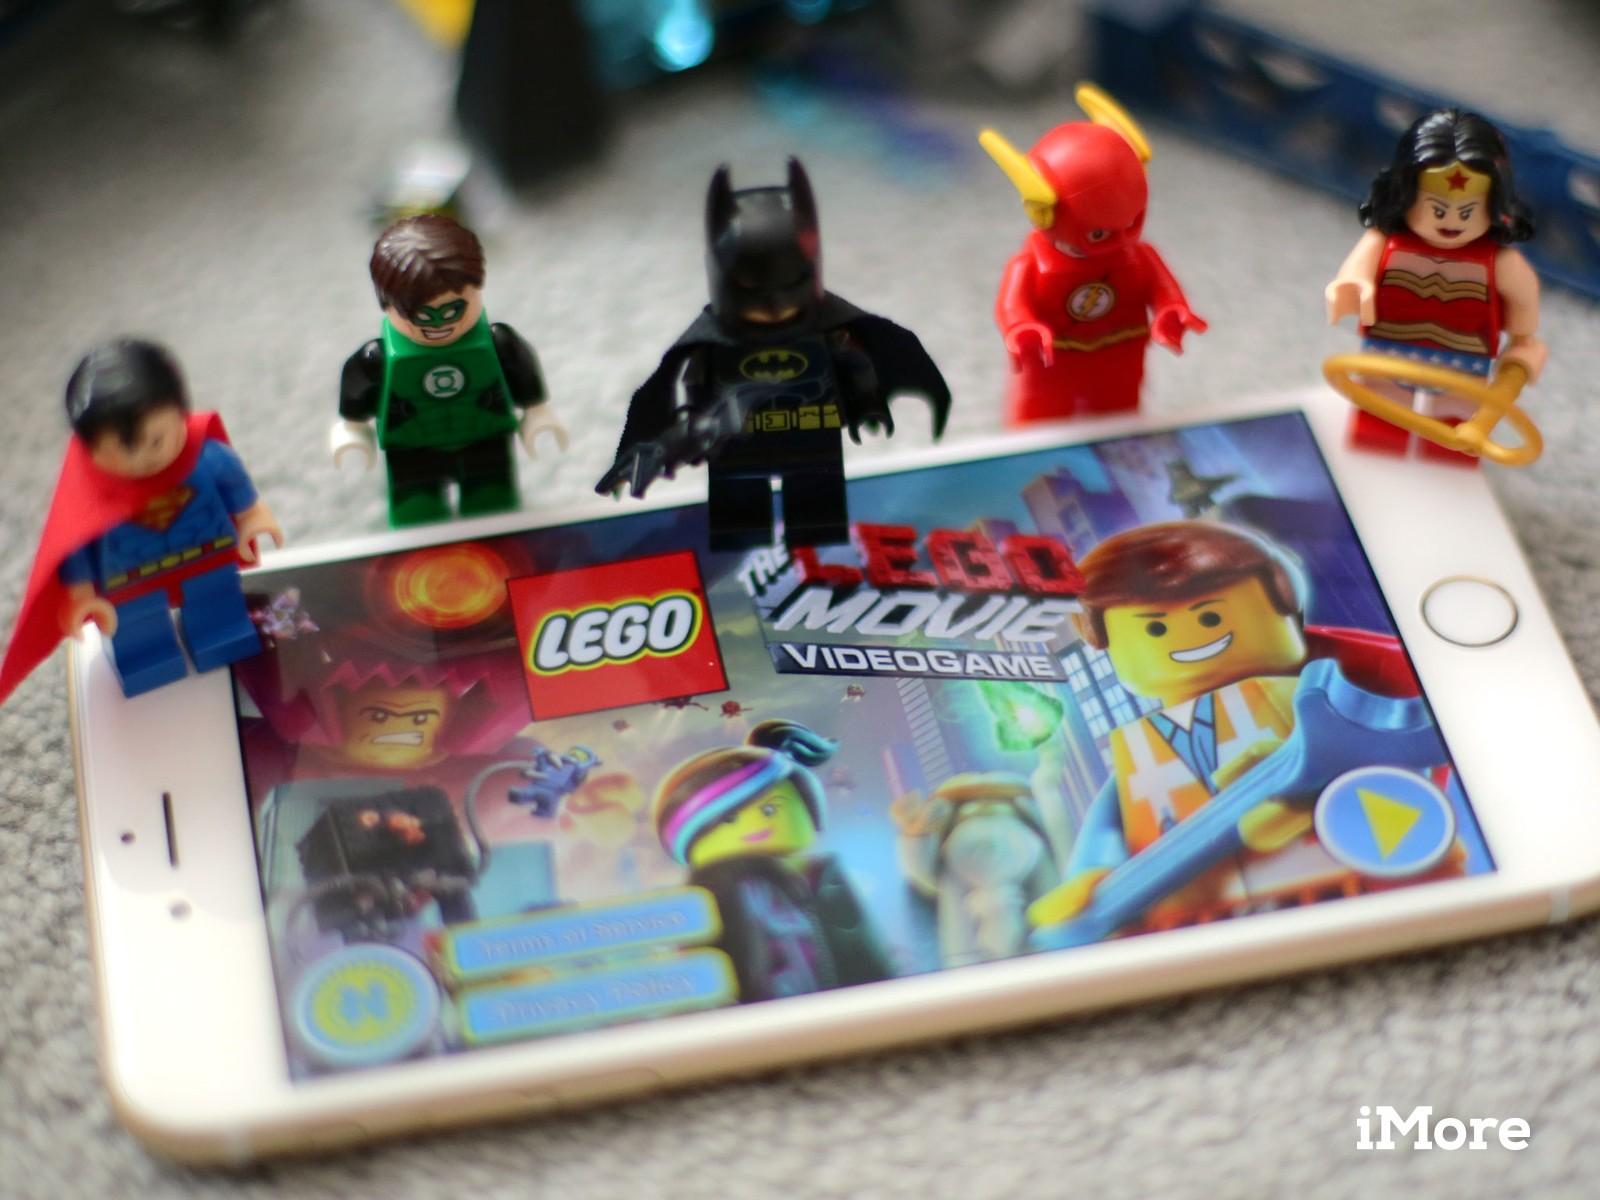 The Lego Movie Video Game: Top tips, hints, and cheats you need to